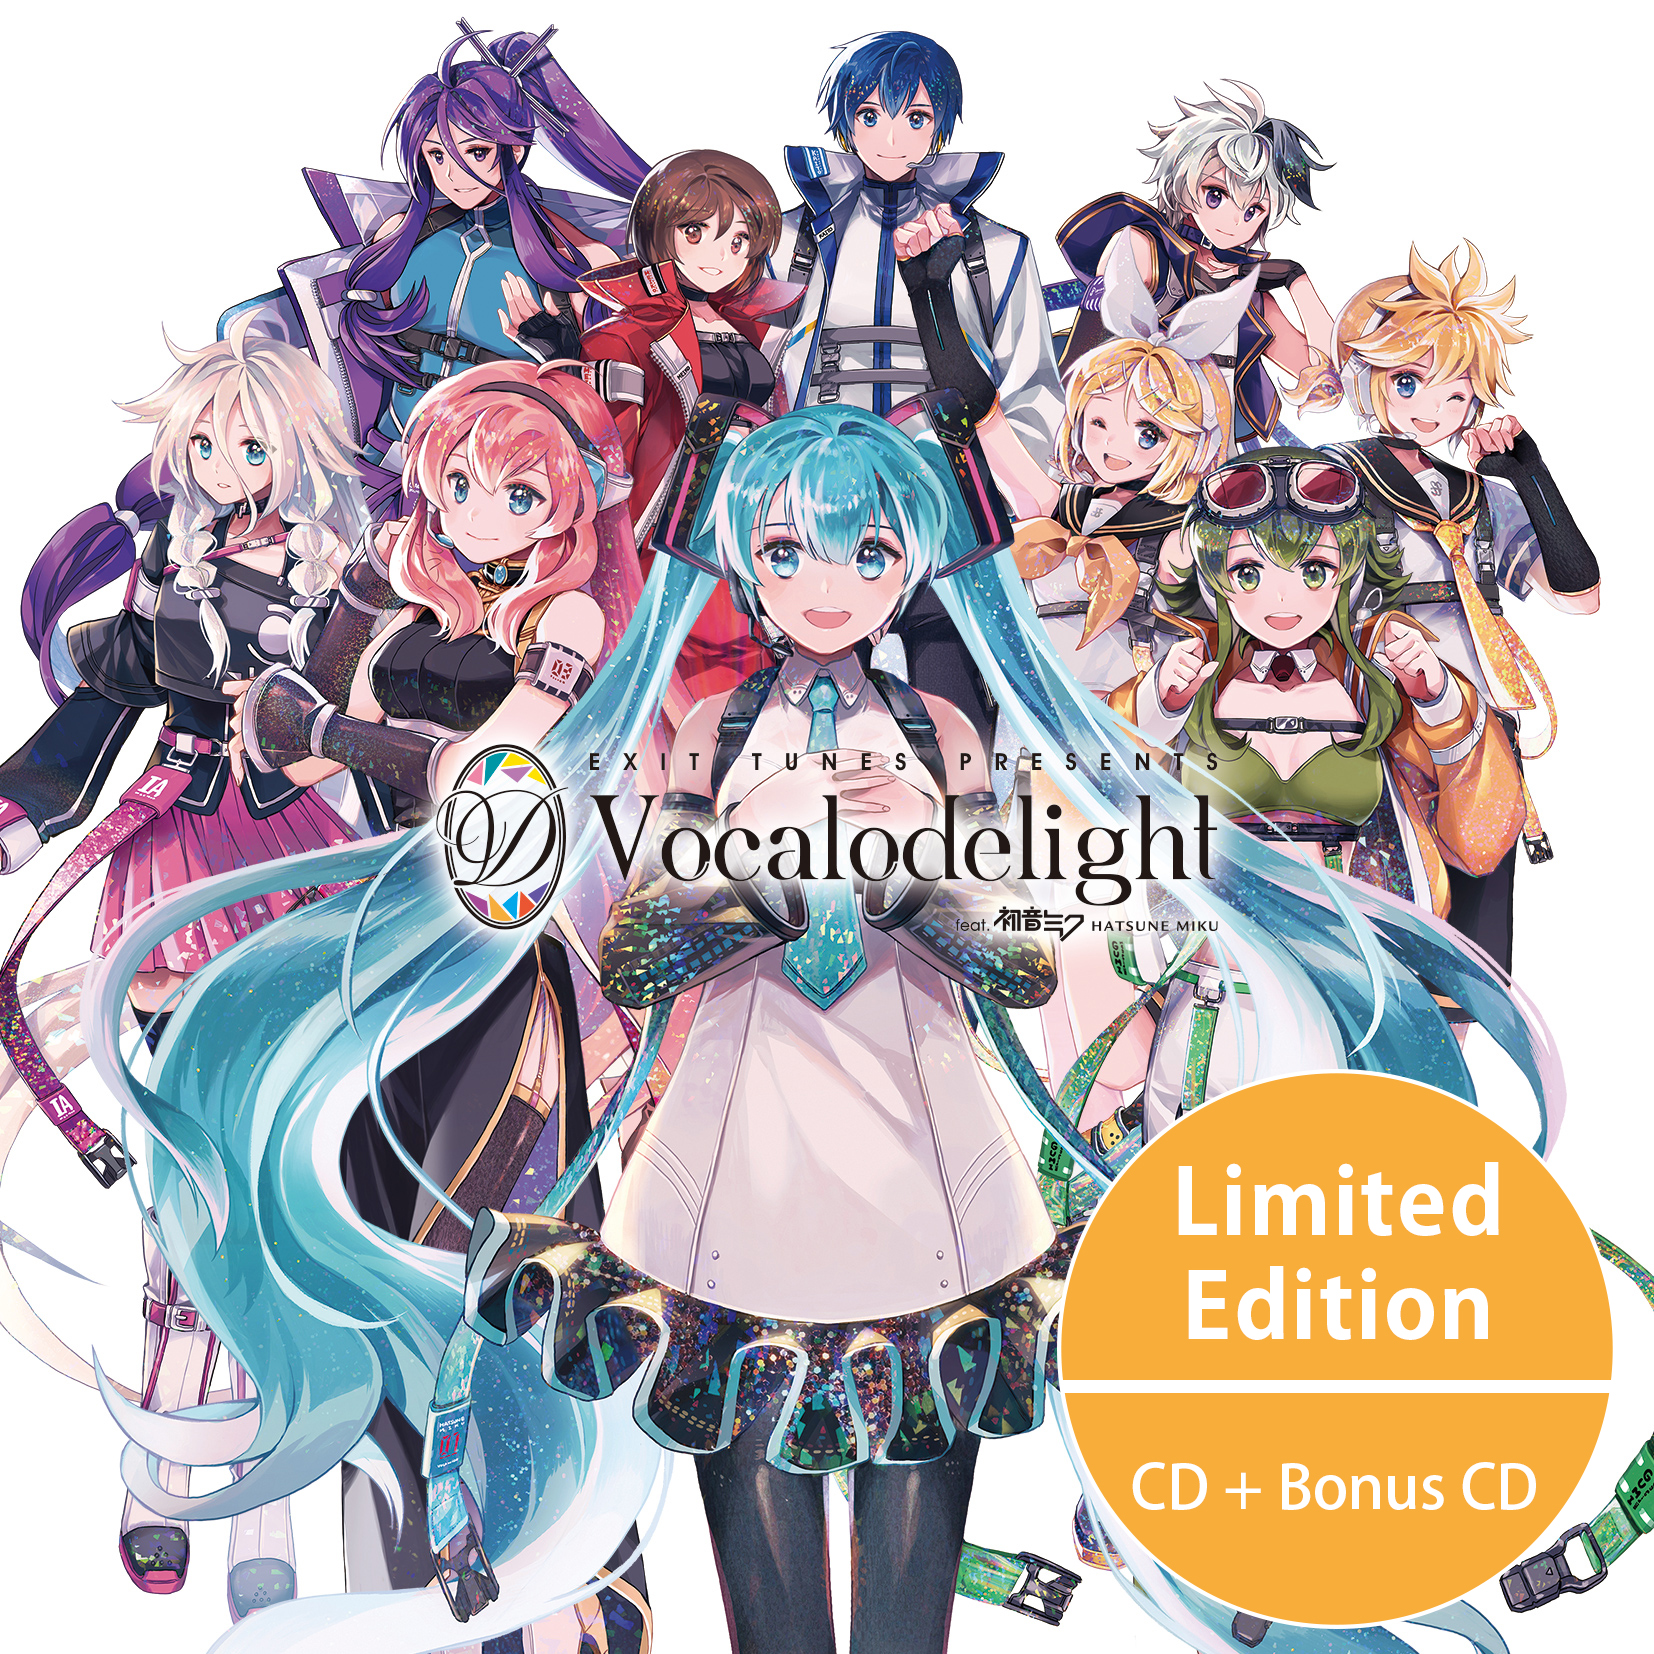 EXIT TUNES PRESENTS Vocalodelight feat. Hatsune Miku Limited Edition(CD+Bonus CD) Release on December15th, 2021